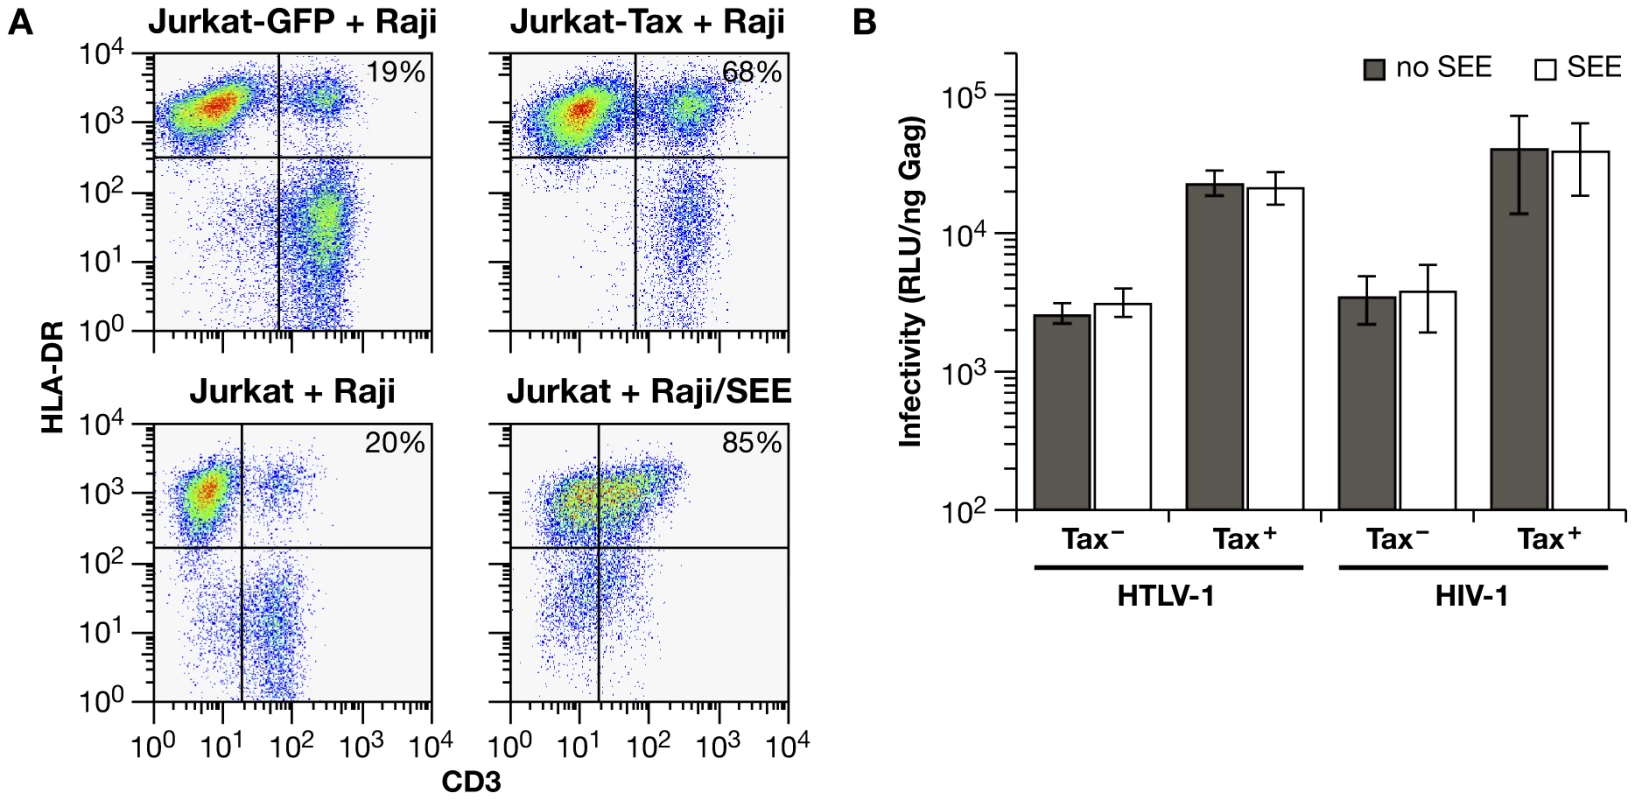 A superantigen-induced immunological synapse does not enhance infection with HIV-1 or HTLV-1 VLPs.